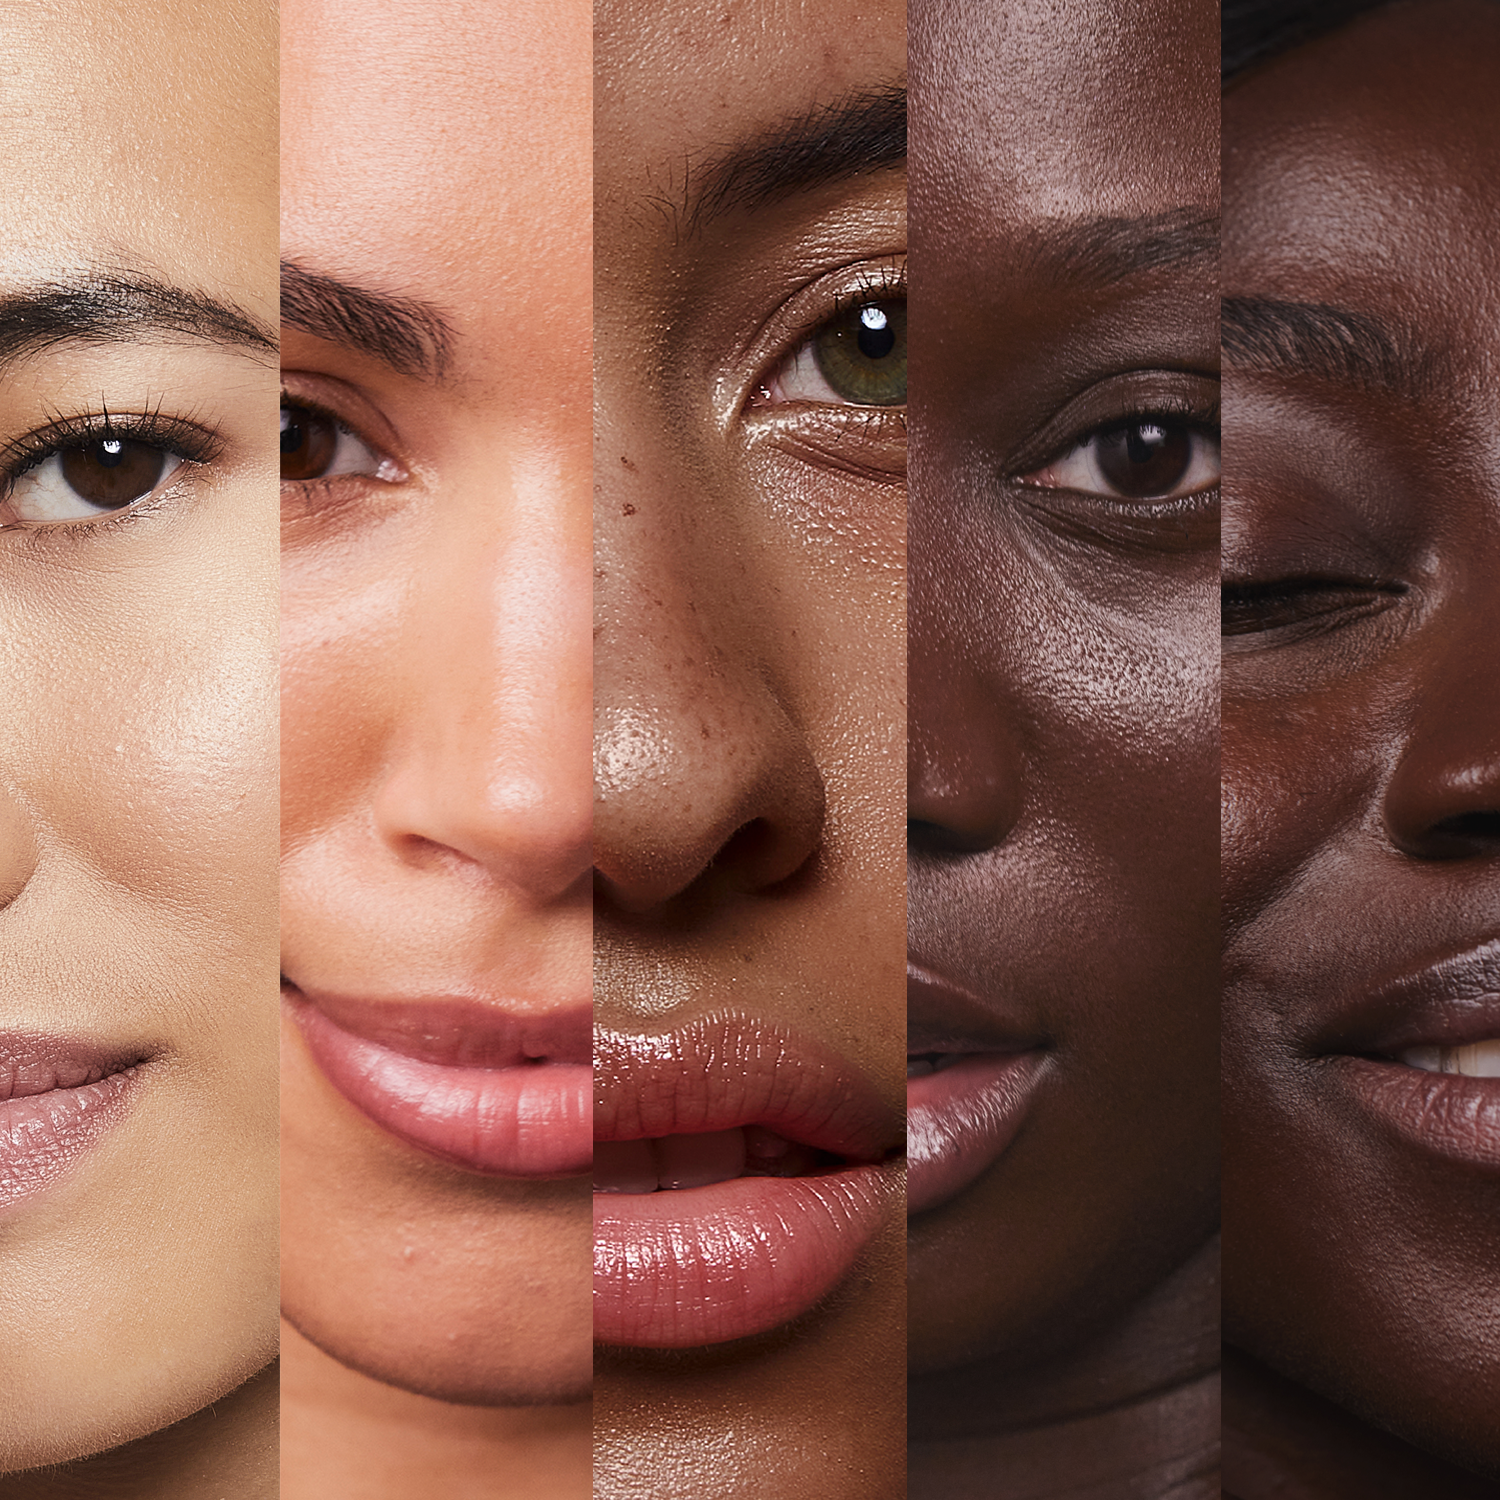 Skincare for darker skin tones. Designed for phototypes 4, 5 and 6